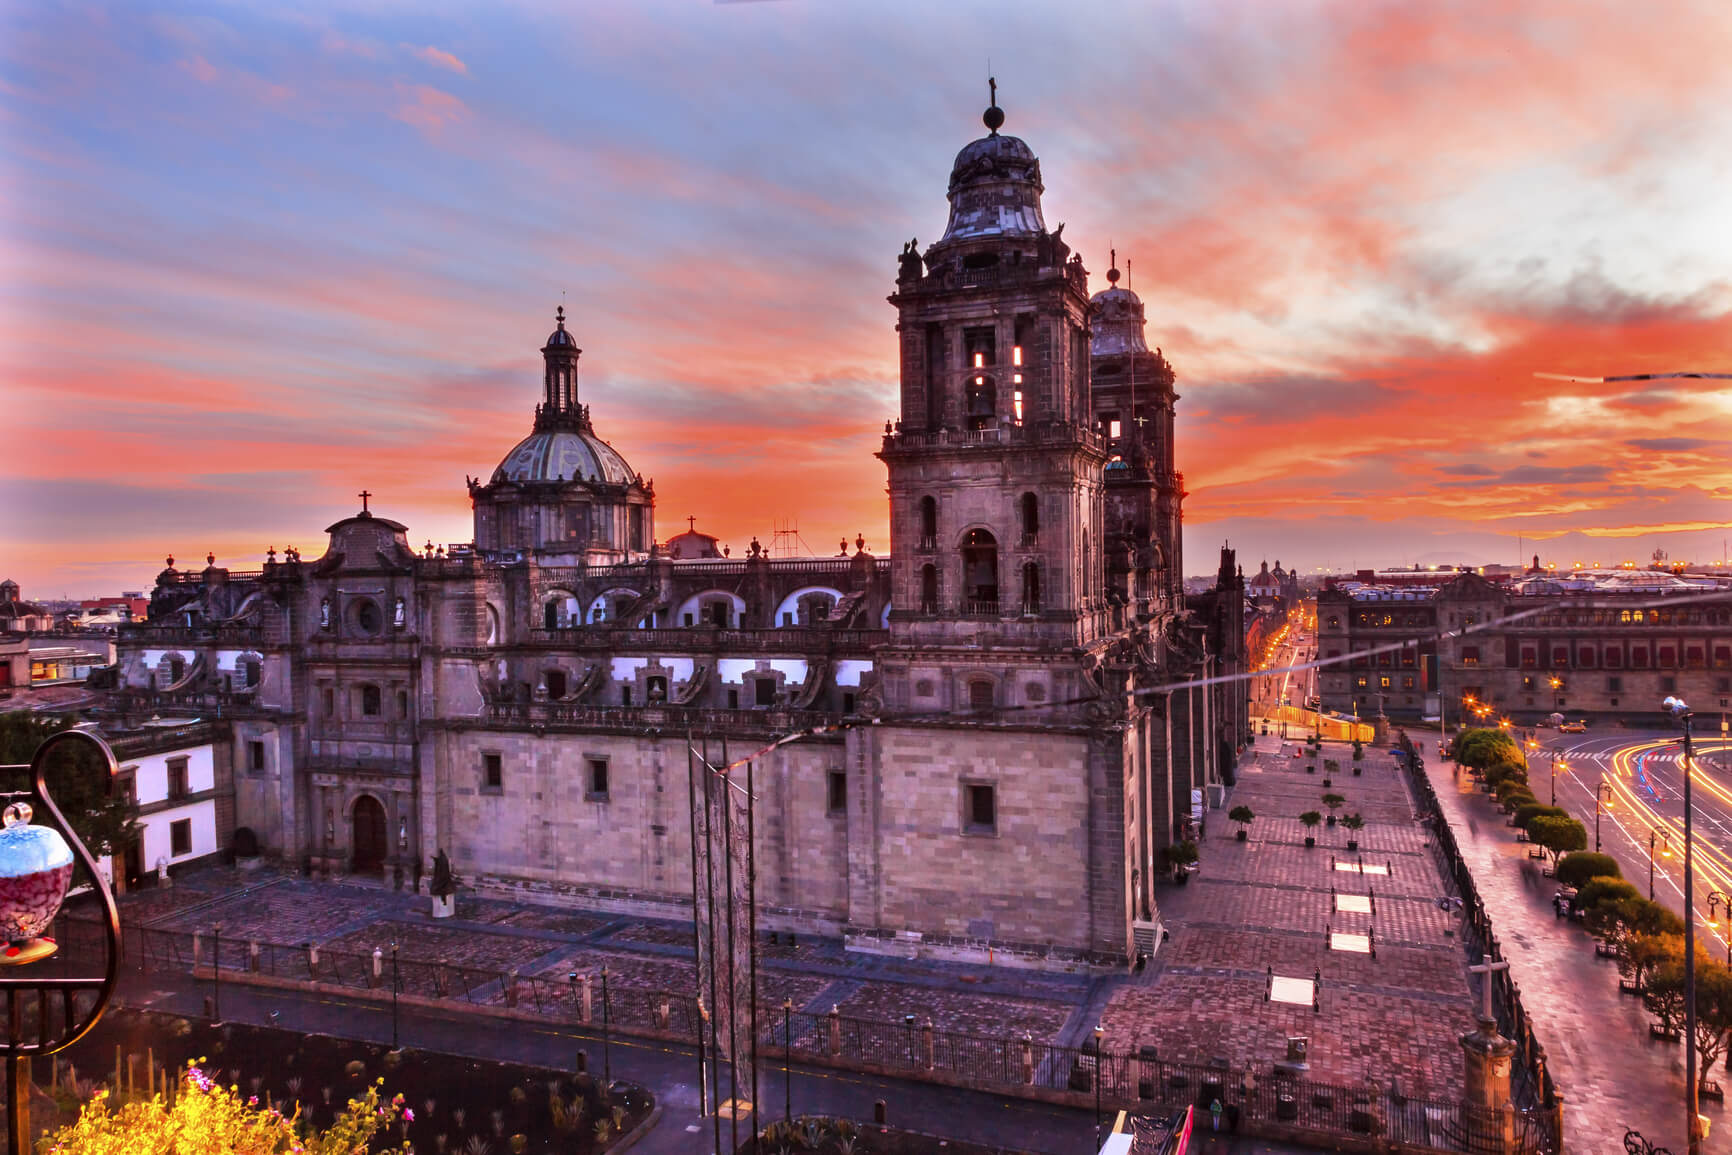 <div class='expired'>EXPIRED</div>Non-stop from Canada to Mexico City, Mexico from only $319 CAD roundtrip | Secret Flying